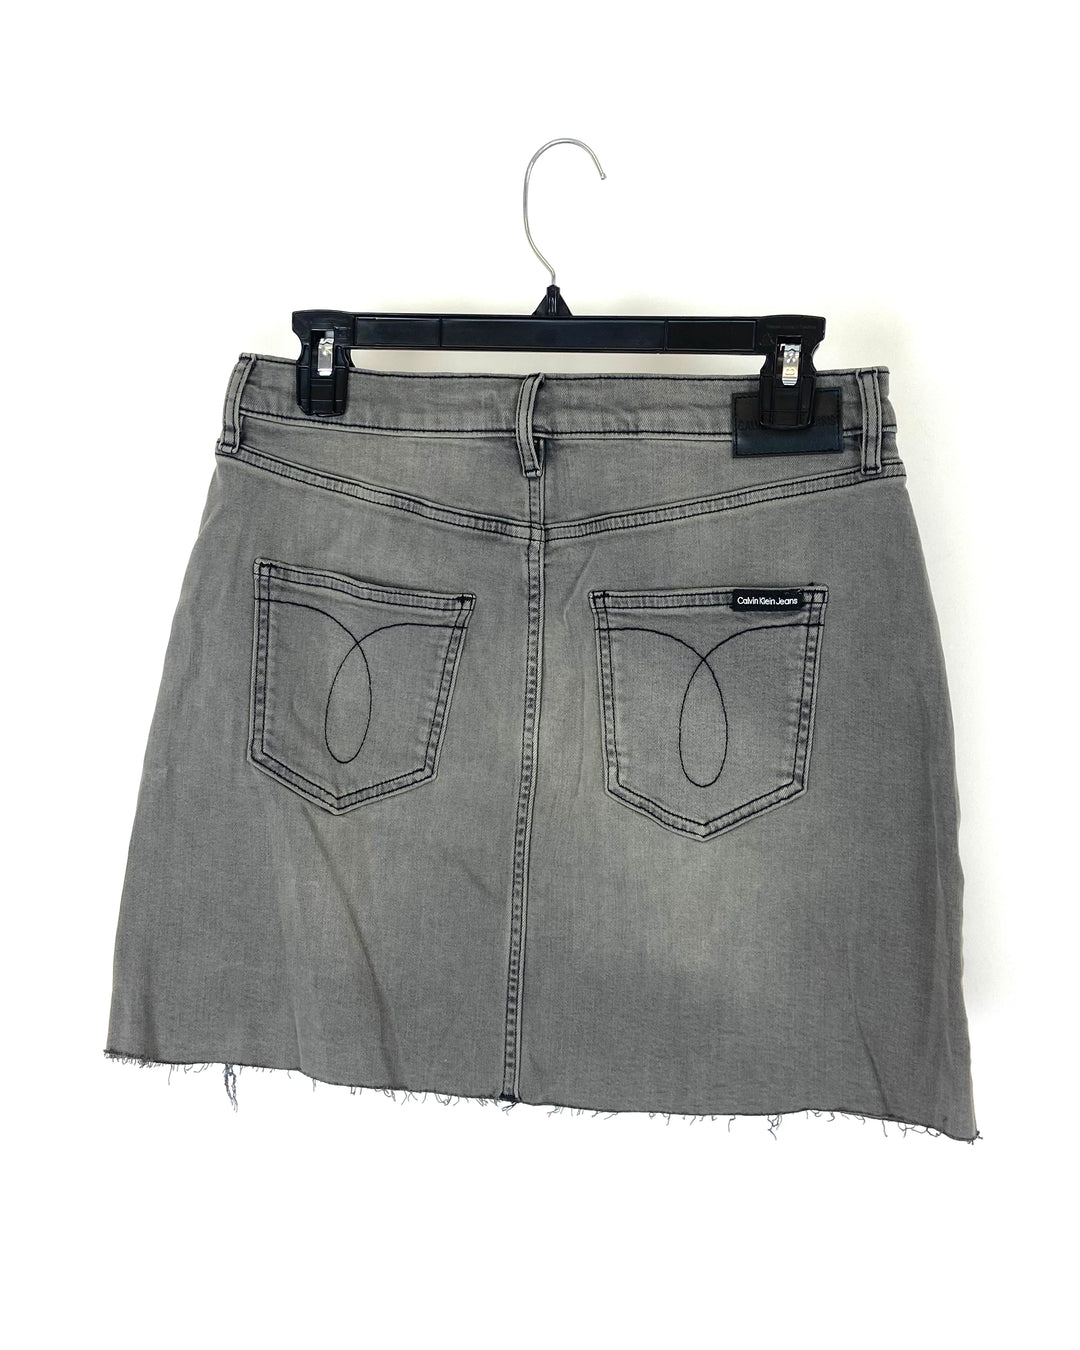 Mid Rise Gray Denim Skirt - Size 27 and 28